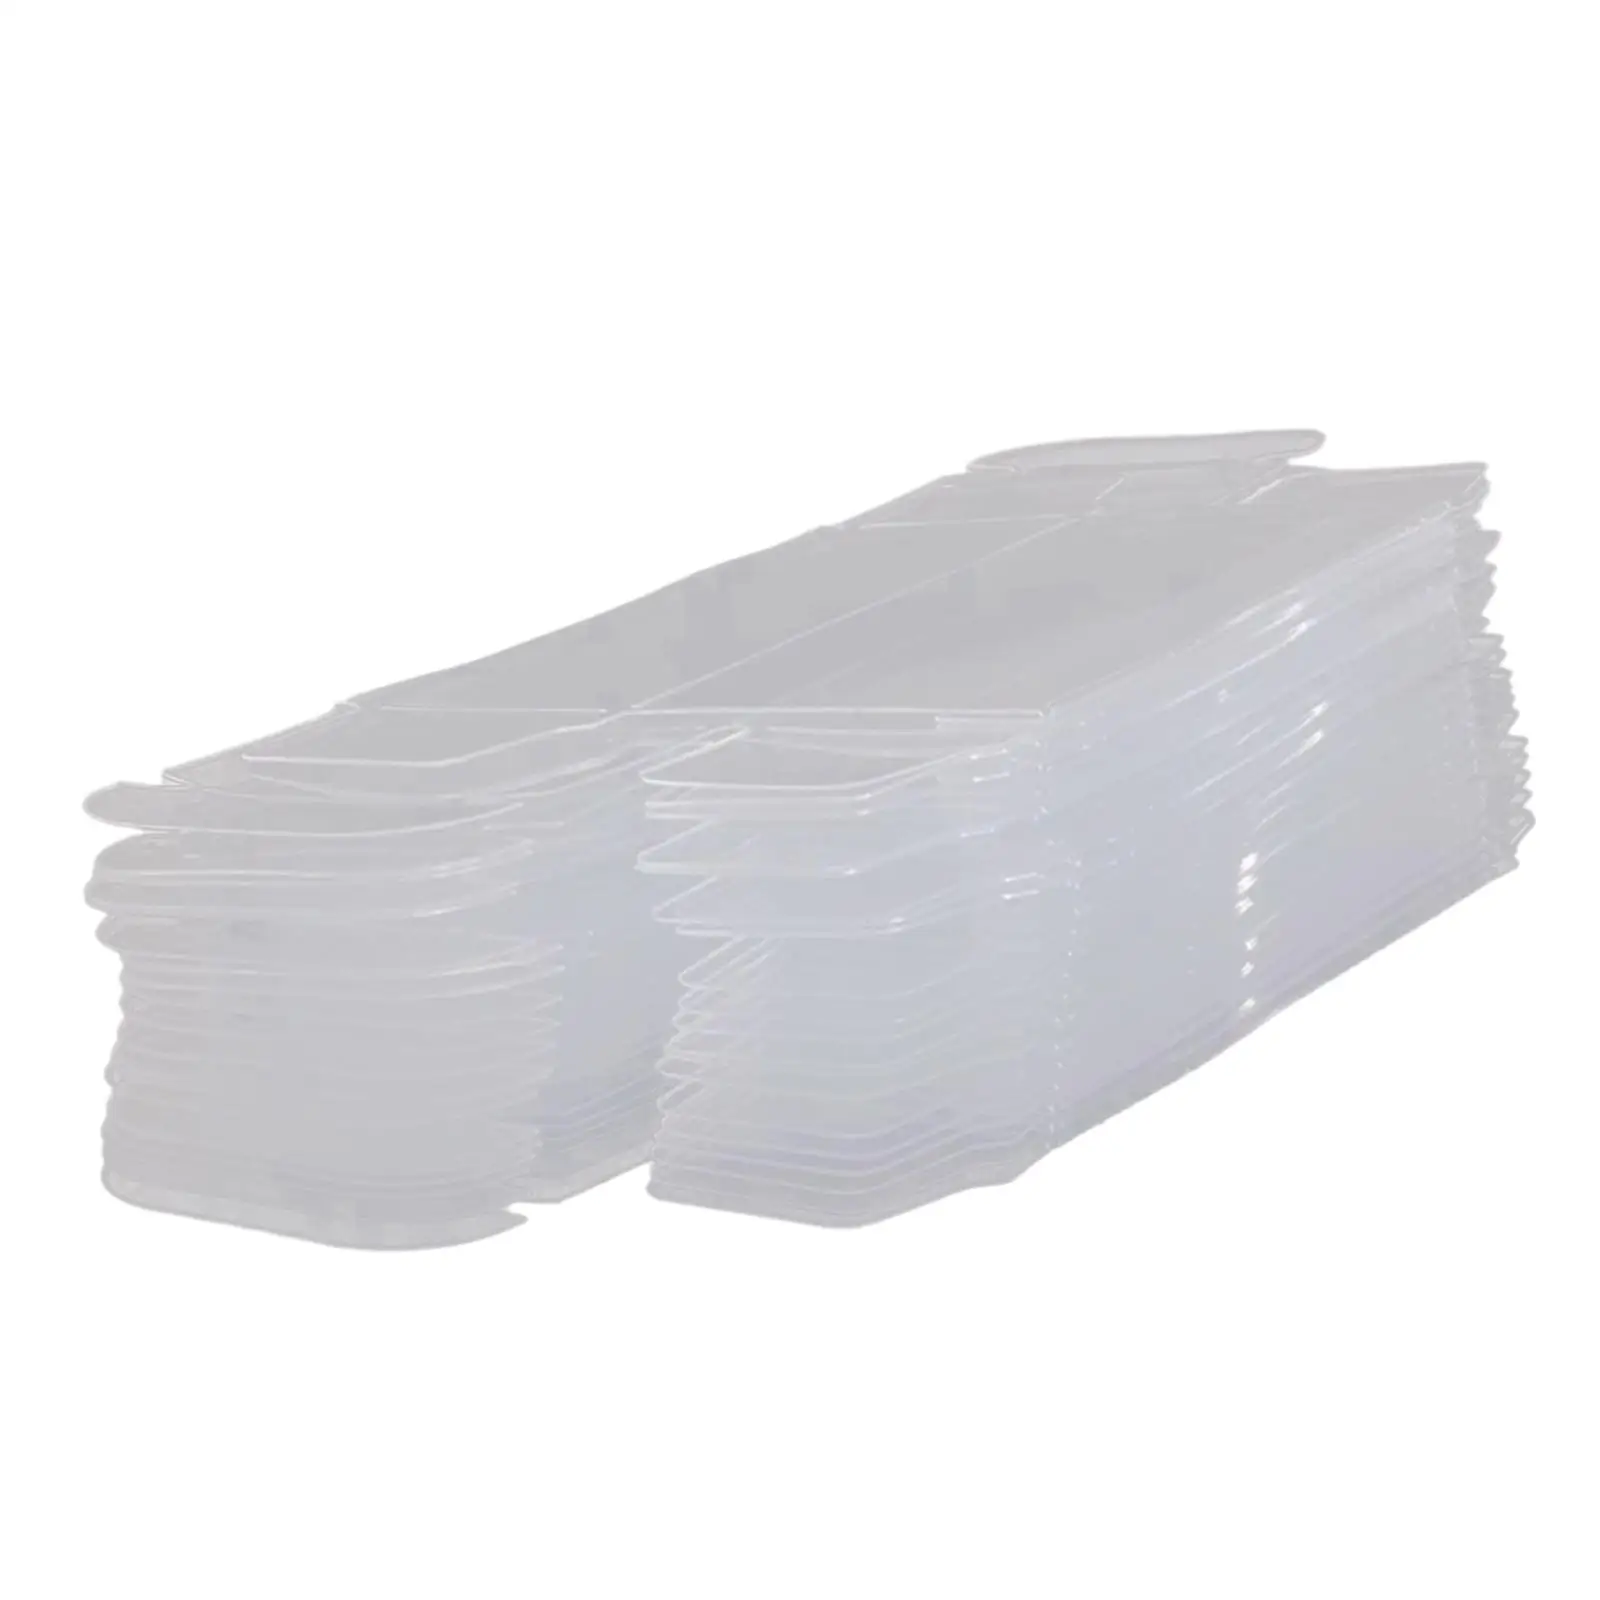 50 Pieces PVC Clear Box 1/64 Car Toy Display Showcase for Action Figures Miniature Figurines Model Cars Dolls Collectibles